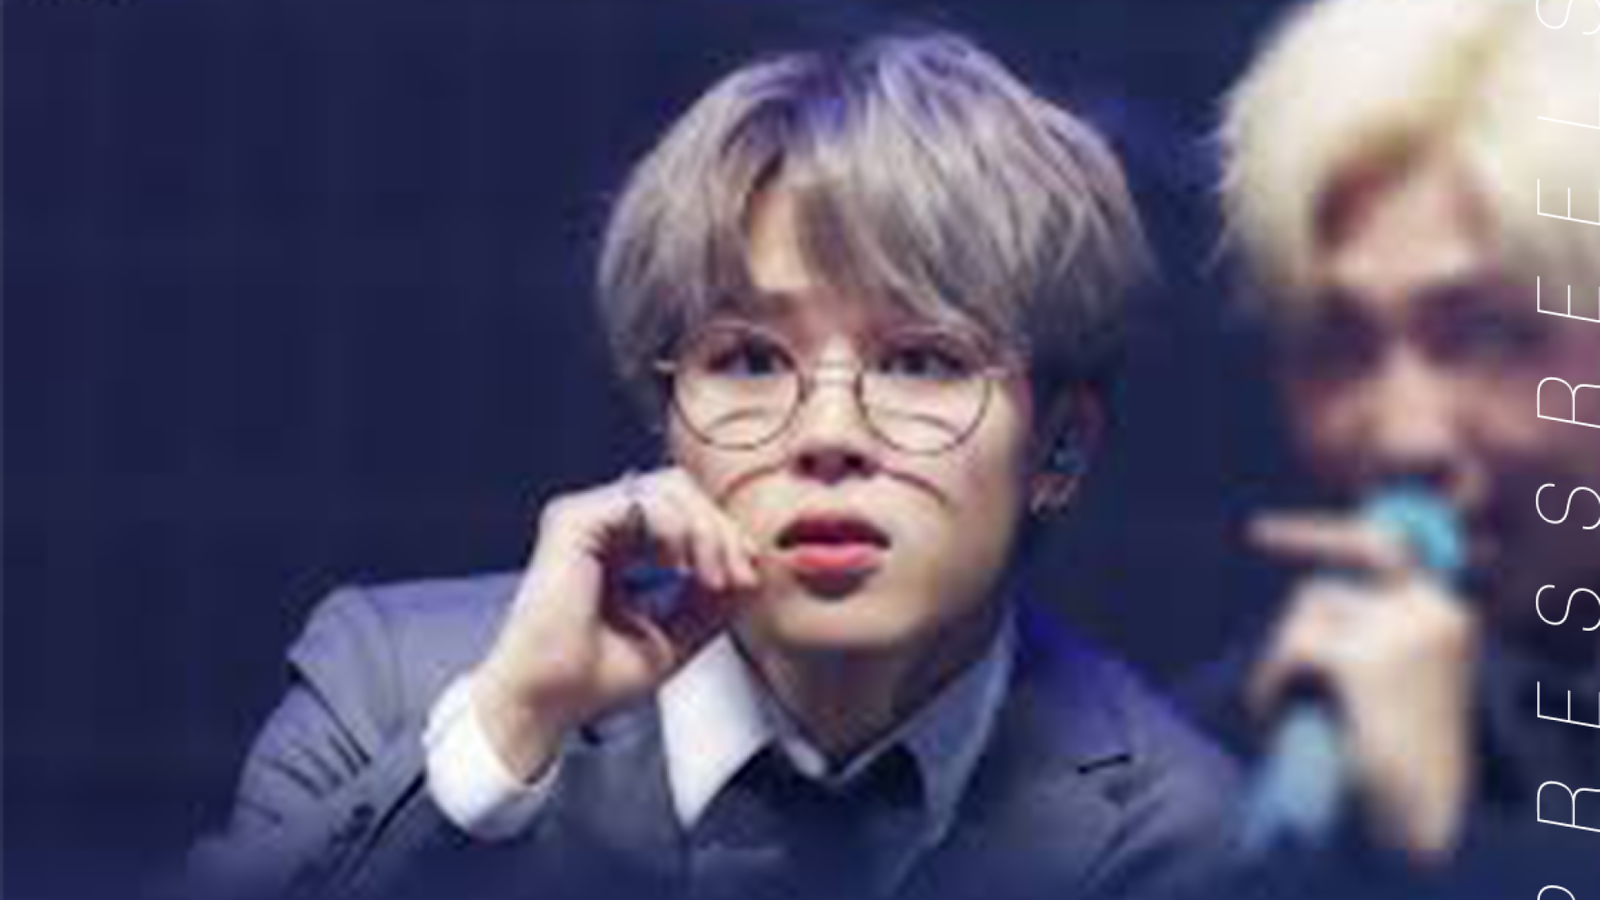 BTS Jimin, Another Charm with Just Glasses